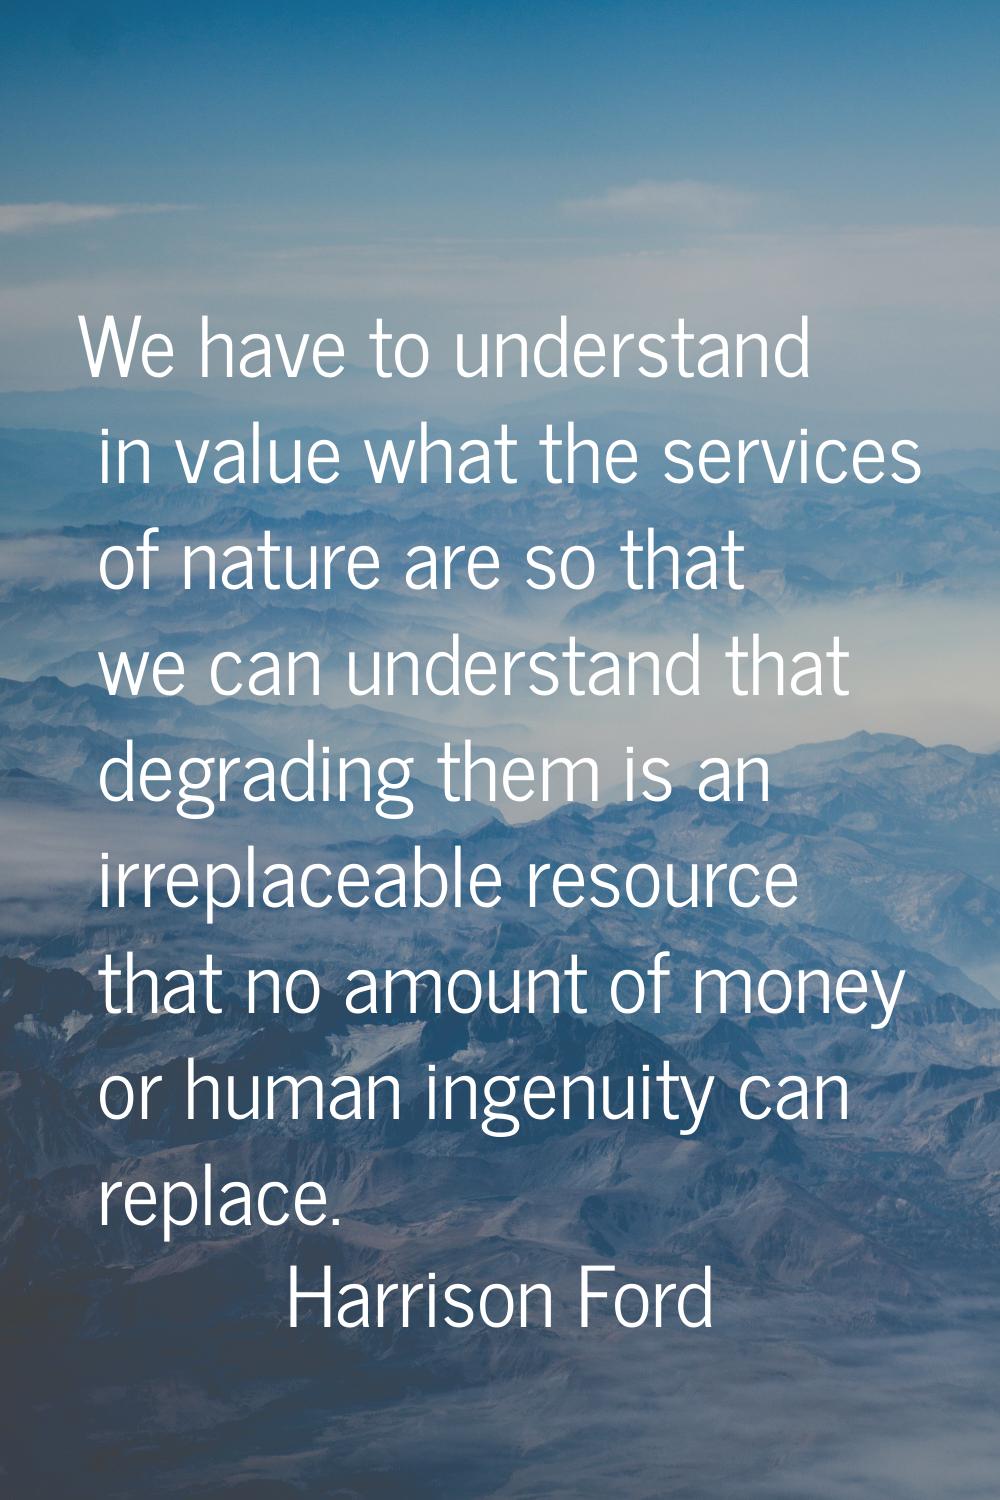 We have to understand in value what the services of nature are so that we can understand that degra